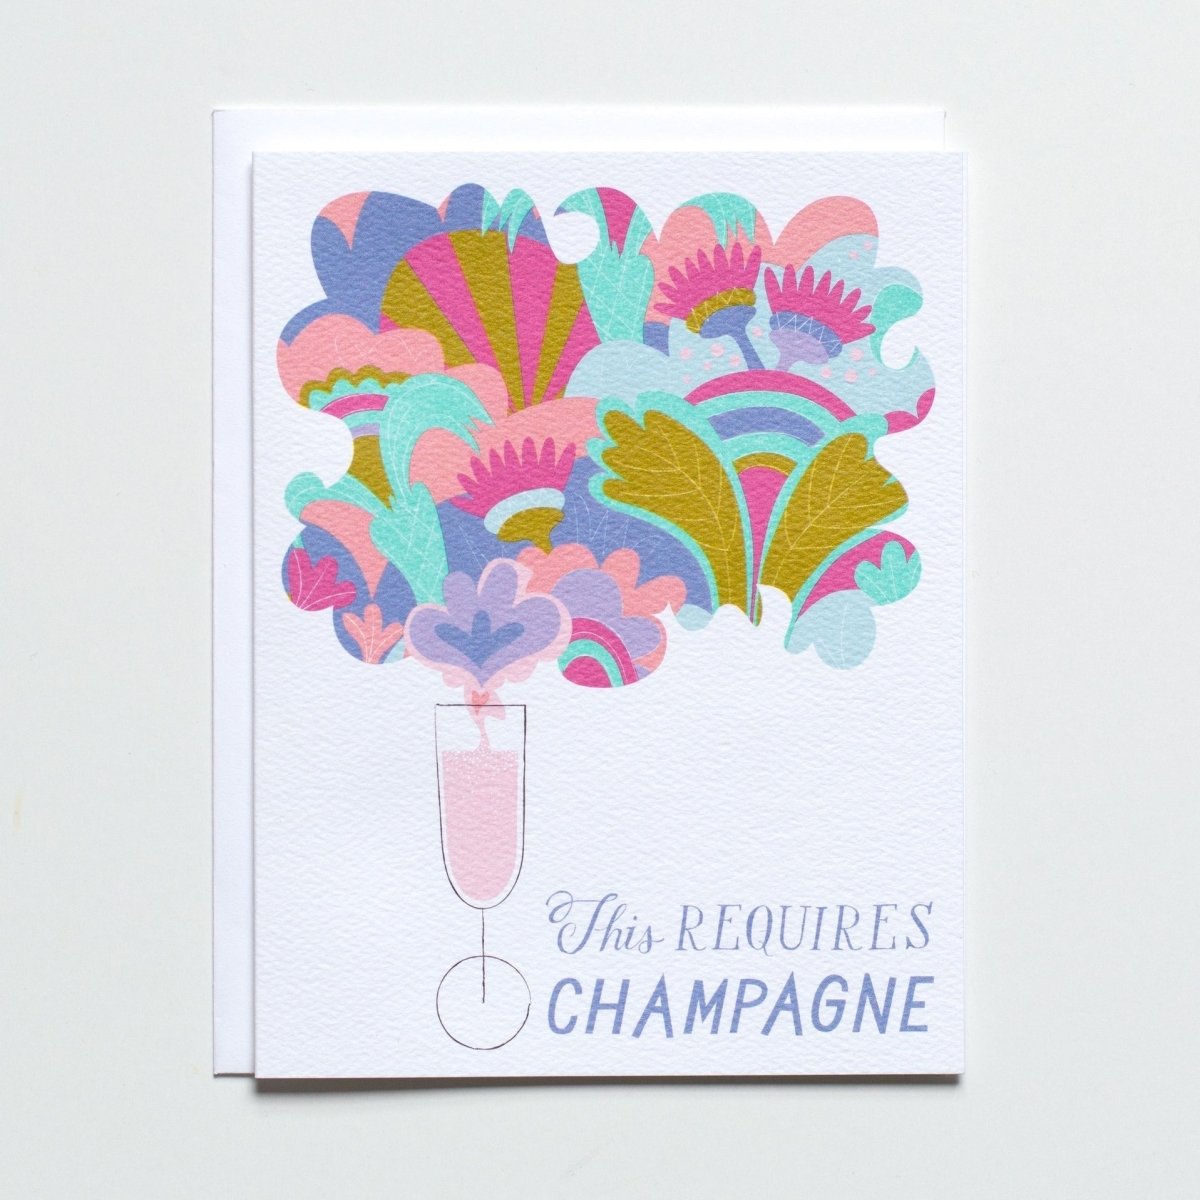 White greeting card with an illustration of a champagne glass emitting whimsical pink, green, teal, and blue illustrations. Front of card reads: "THIS REQUIRES CHAMPAGNE." Made with recycled paper by Banquet Atelier in Vancouver, British Columbia, Canada.